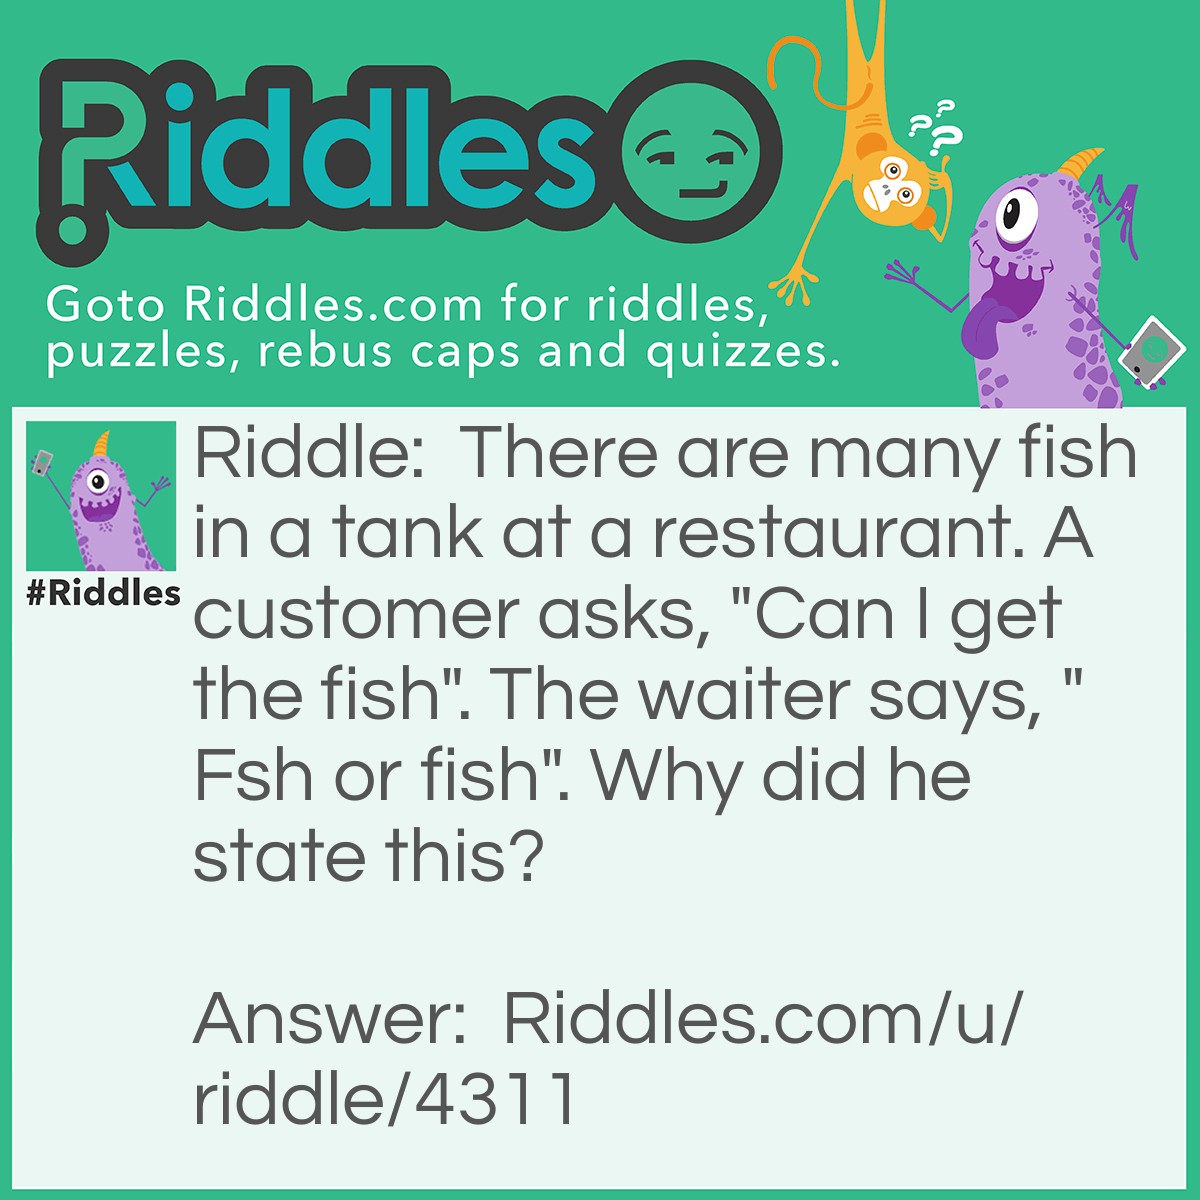 Riddle: There are many fish in a tank at a restaurant. A customer asks, "Can I get the fish". The waiter says, "Fsh or fish". Why did he state this? Answer: The fish has eyes but the fsh doesn't.